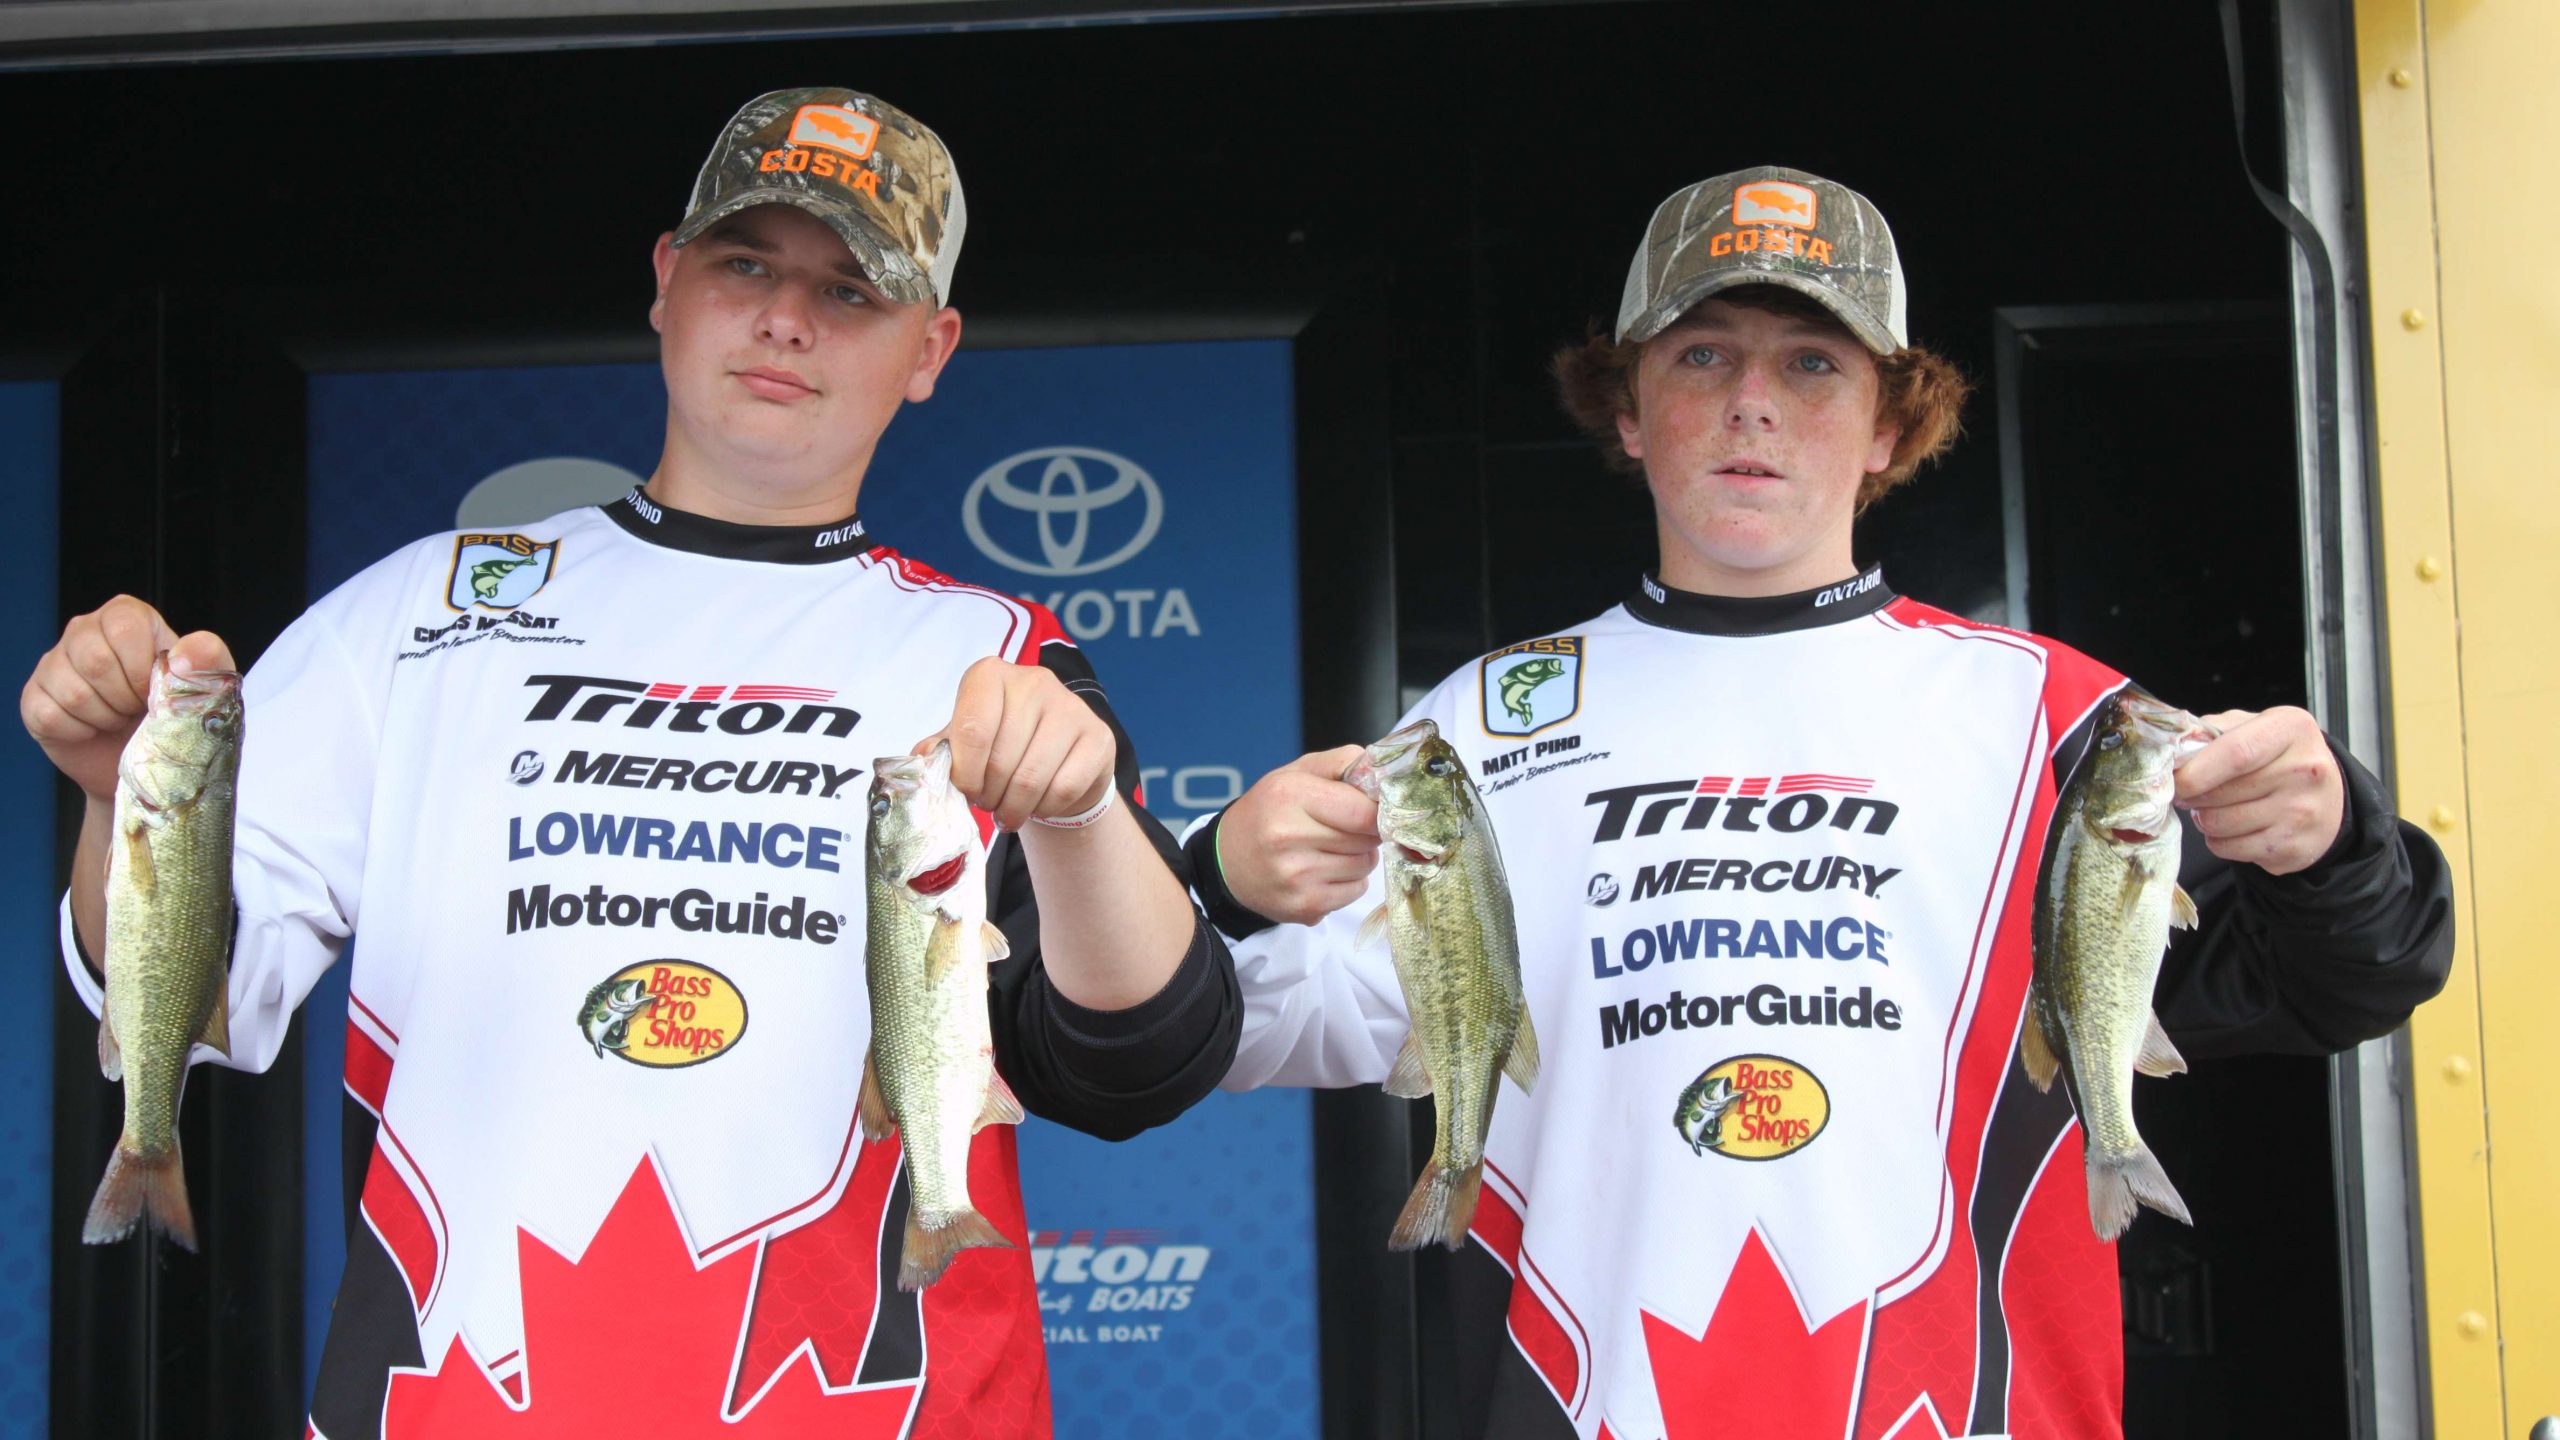 Canada is represented in the Junior National Championship. Chris Mussat and Matthew Piho are in ninth place with five fish weighing 4-0.